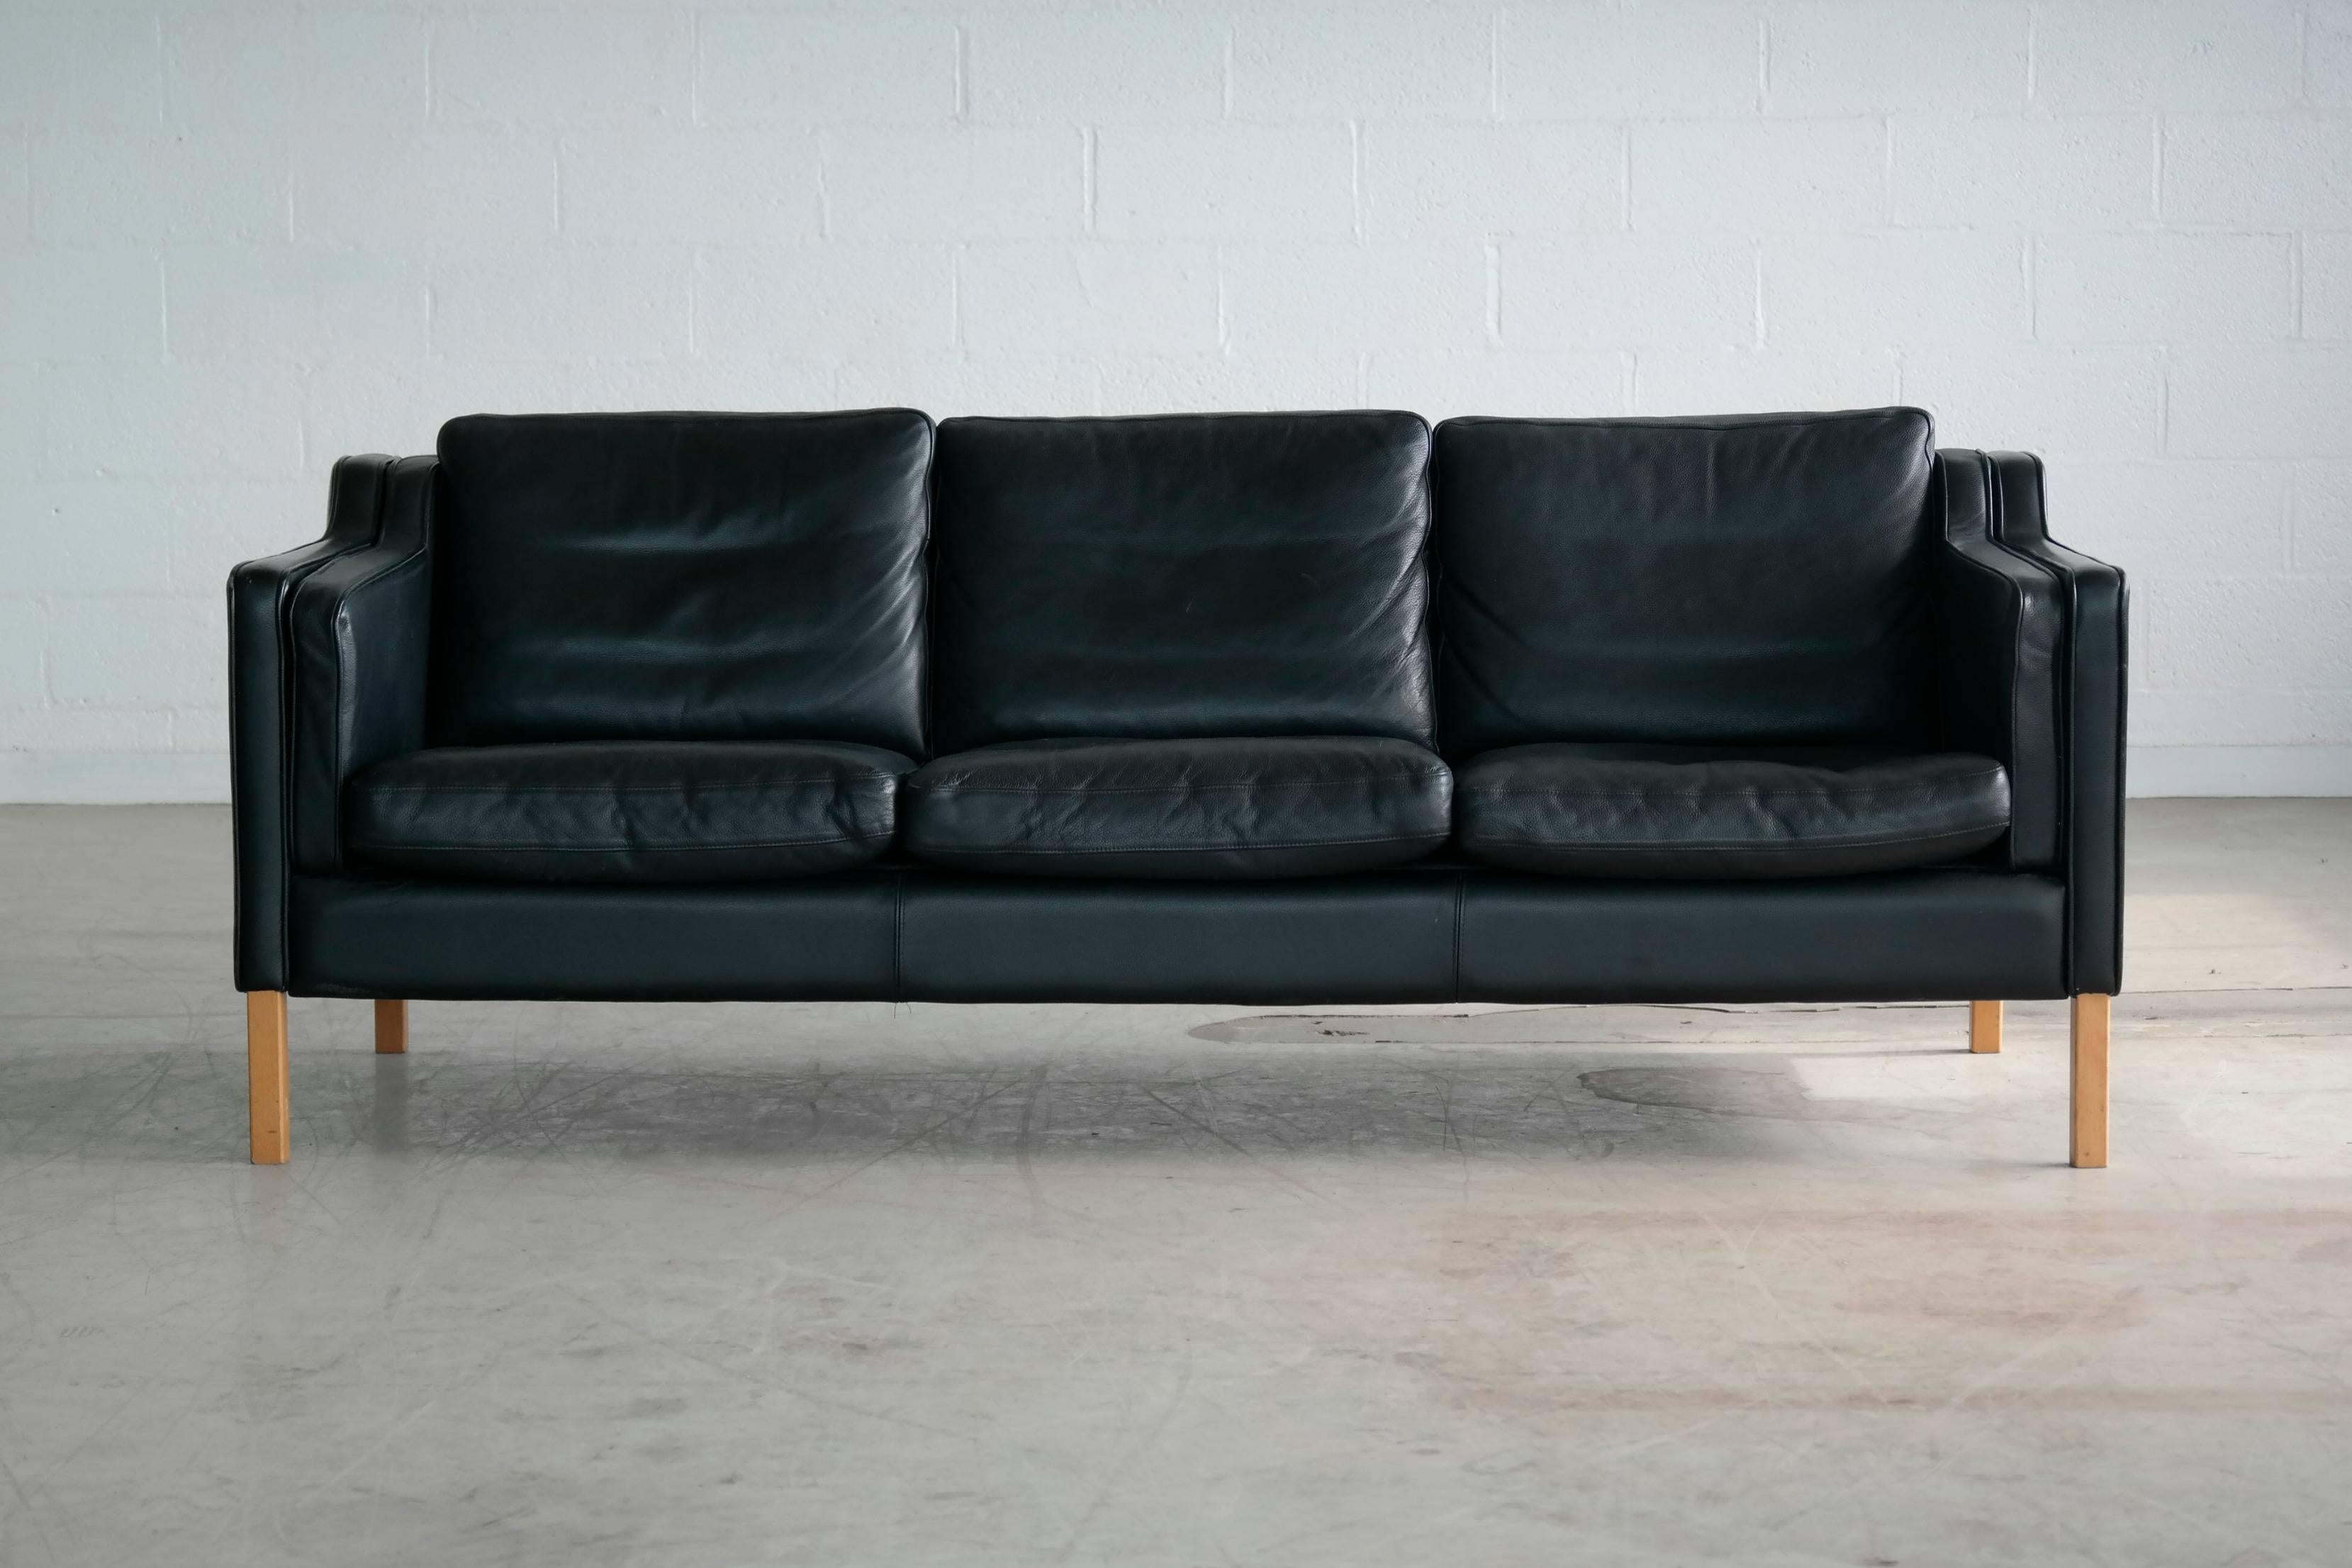 Very elegant and comfortable Classic Borge Mogensen style sofa model 2213 in black leather by Stouby Polsterfabrik of Denmark. High quality leather over a beech wood frame and legs. Cushions are top filled with down. Nice worn in quality with some